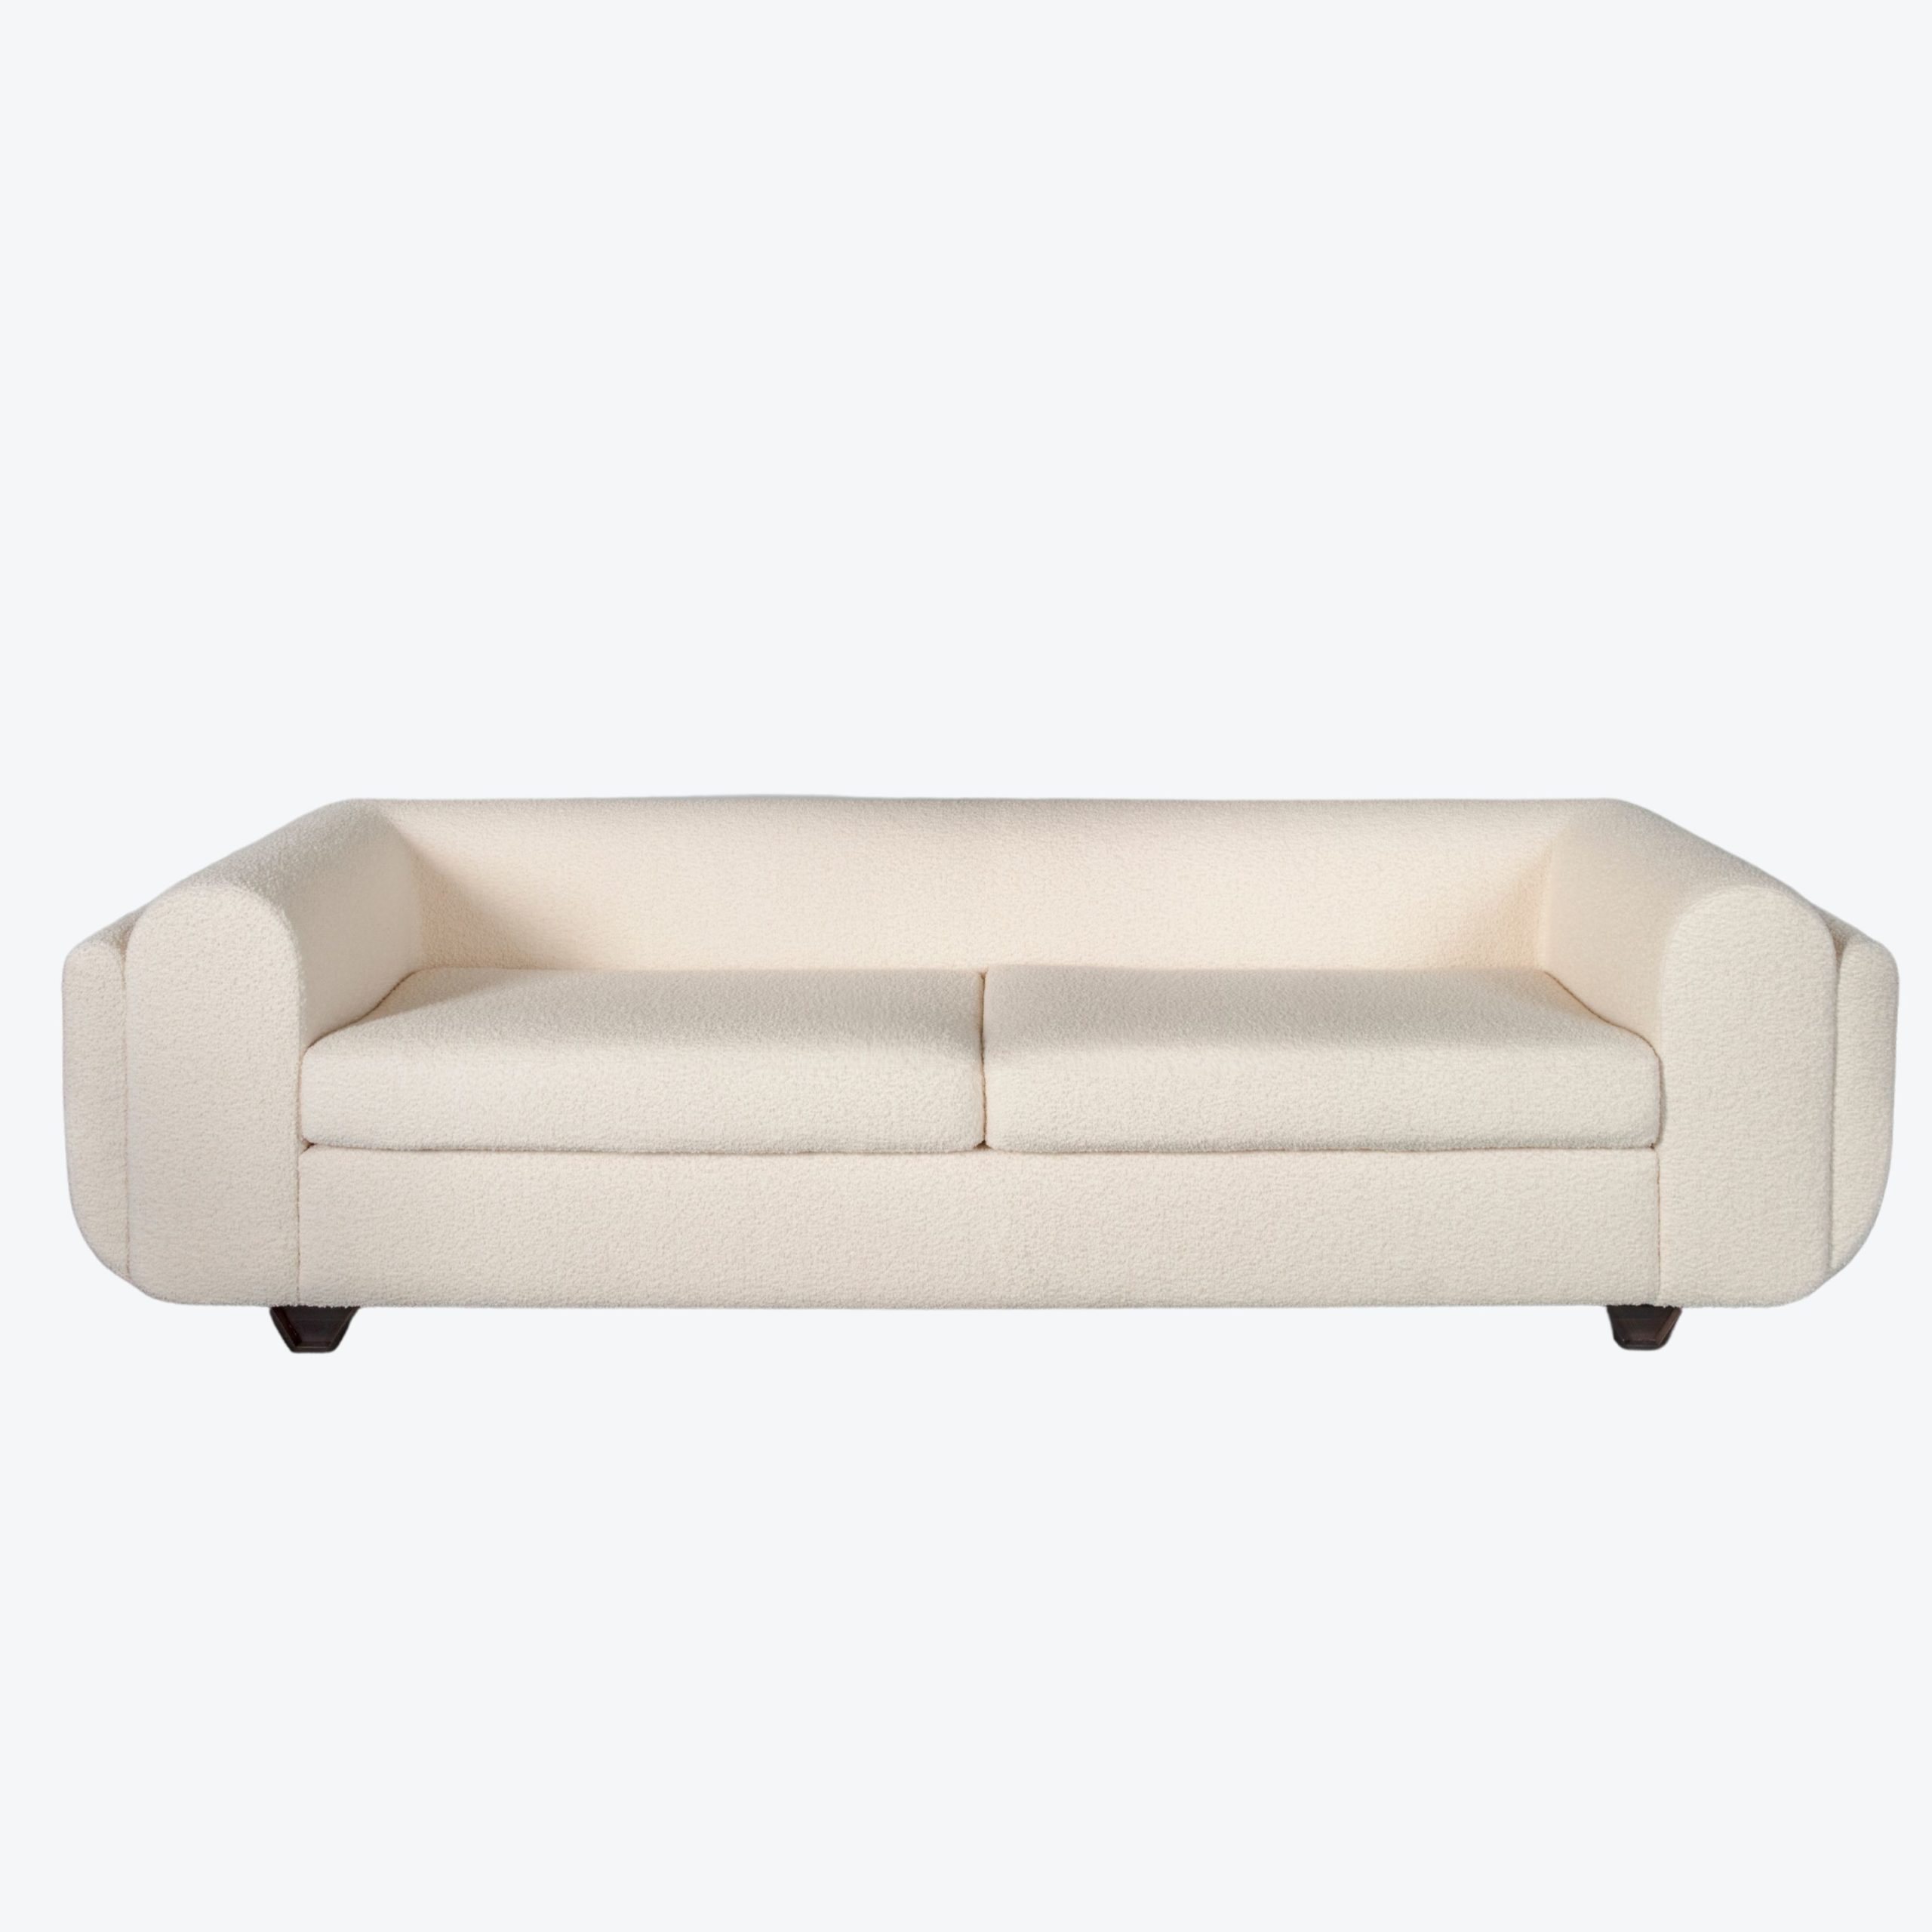 Eileen Sofa With Back Cushion Charlotte Biltgen The Invisible Collection